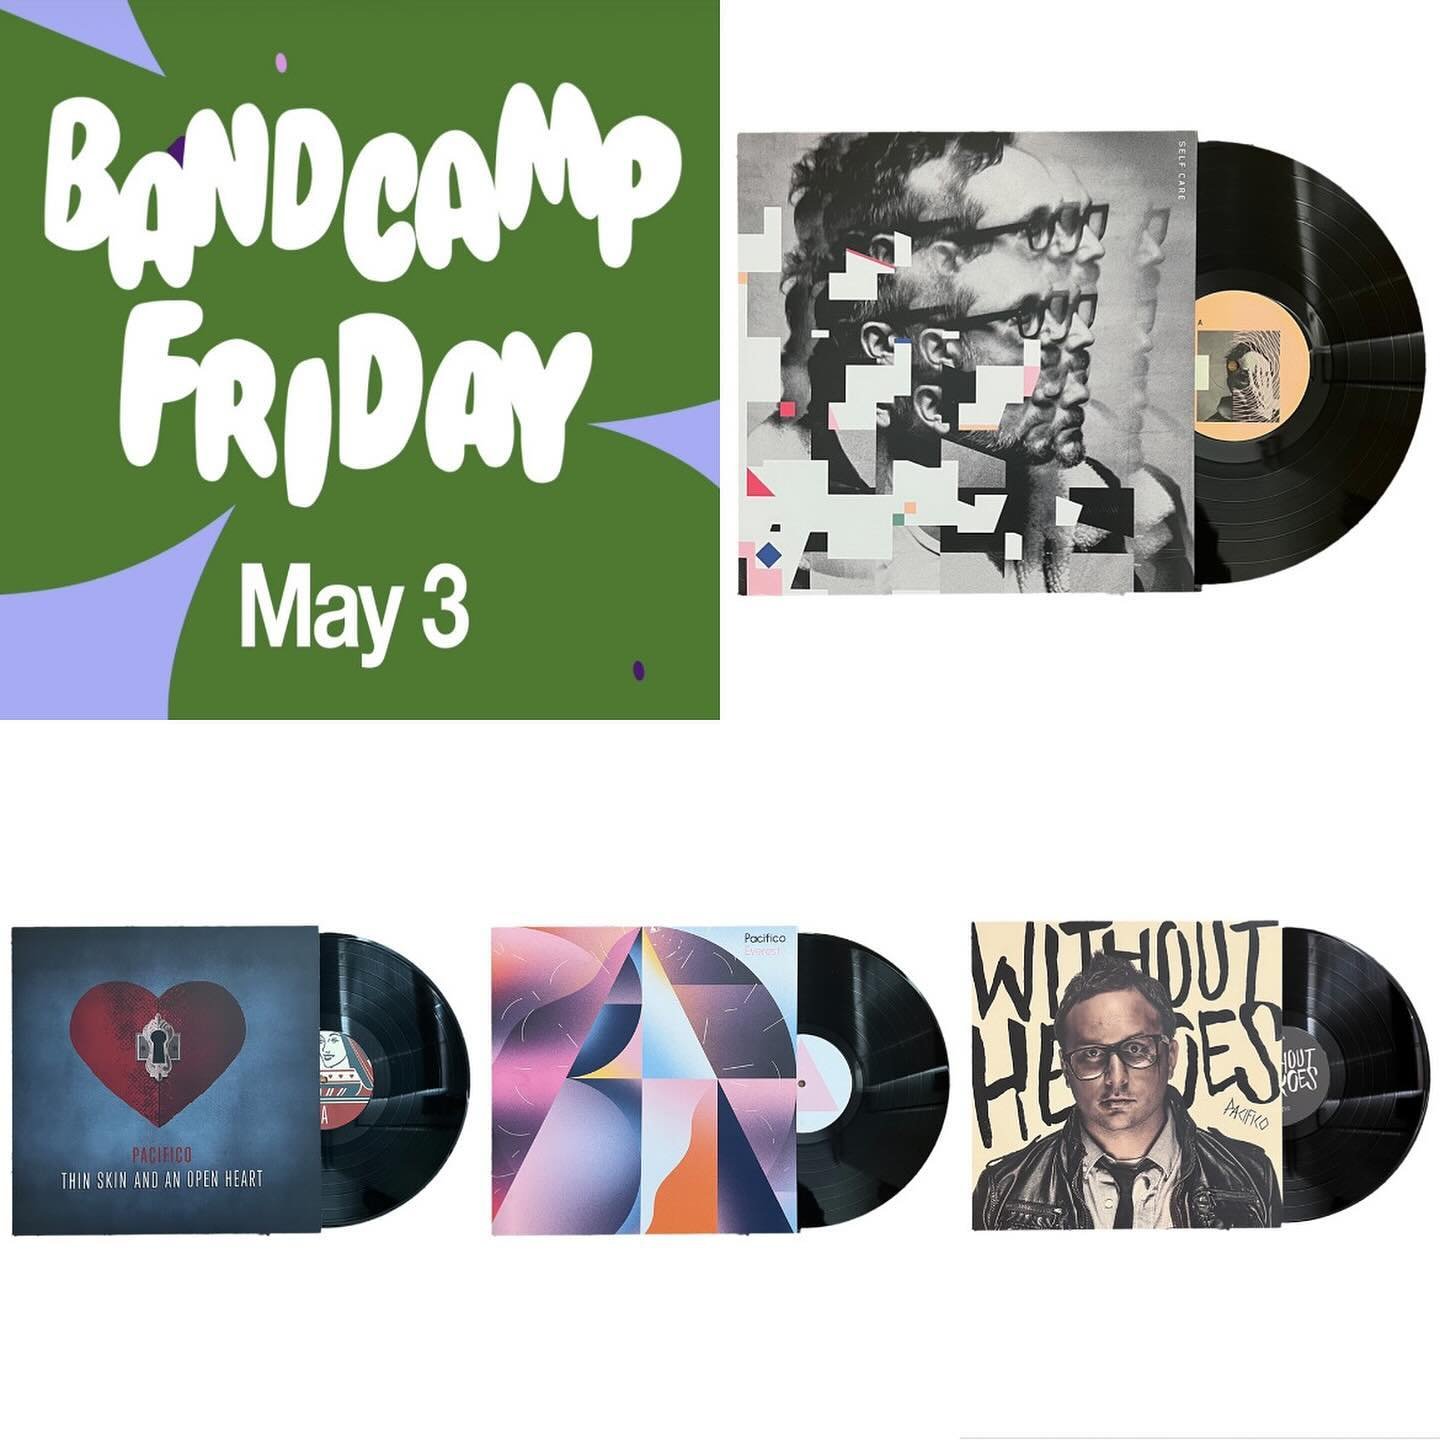 It&rsquo;s Bandcamp Friday!

For those that don&rsquo;t know, Bandcamp Friday is the first Friday of each month. It&rsquo;s the day when Bandcamp decides to waive all their fees, and for that day only, anything you buy on bandcamp goes directly to us